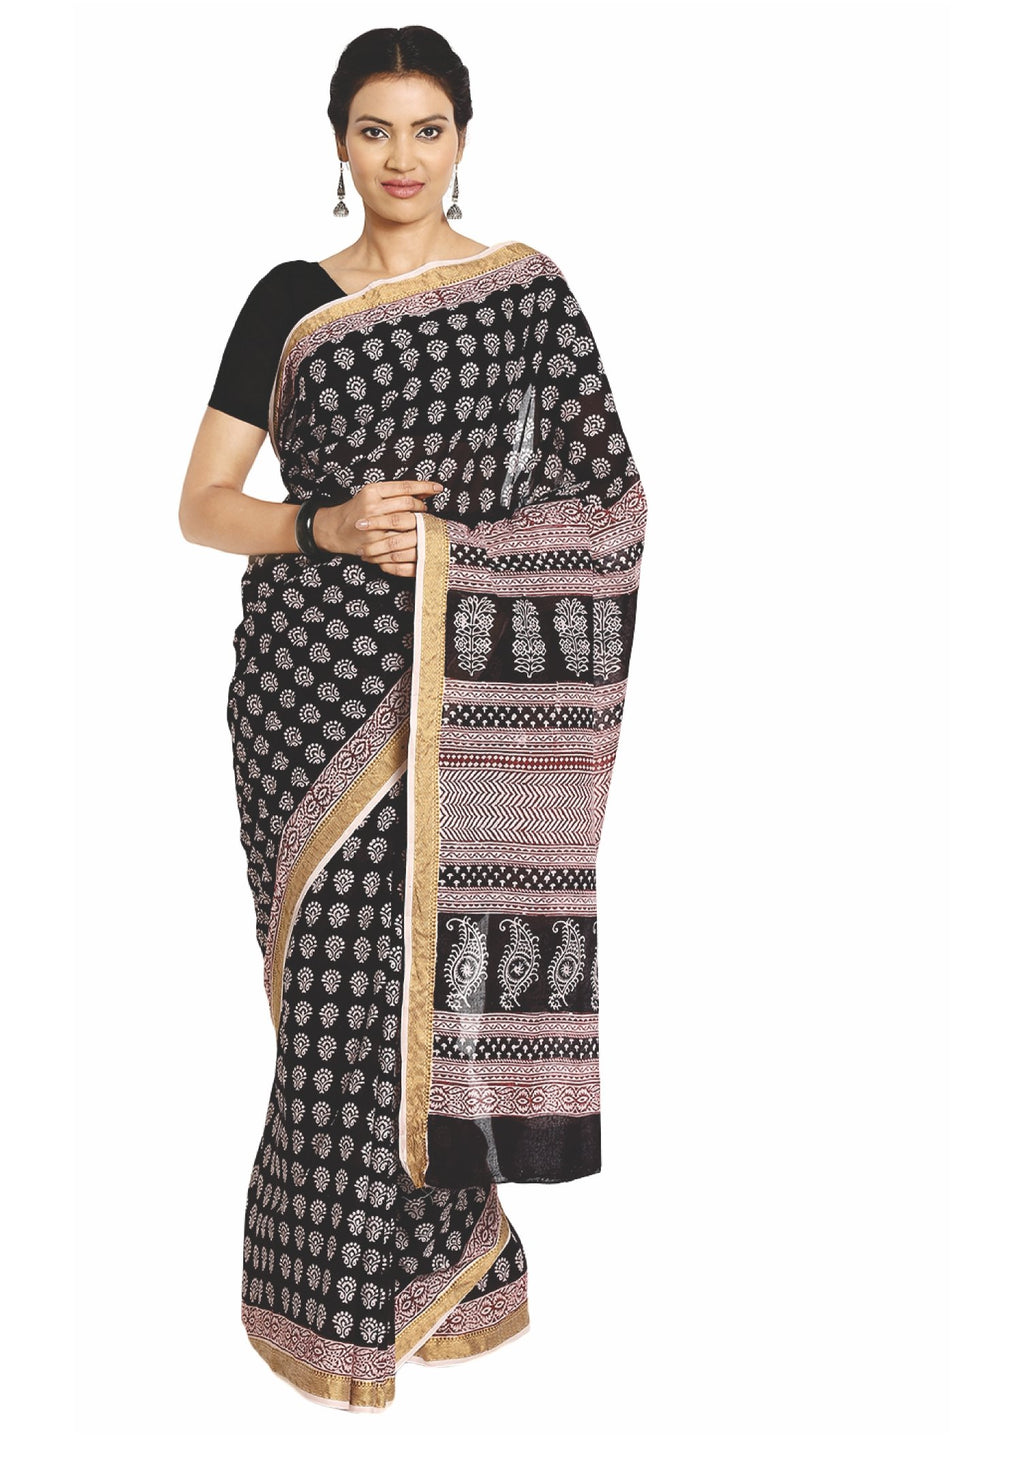 Black Cotton Hand Block Bagh Print Handcrafted Saree-Saree-Kalakari India-ZIBASA0054-Bagh, Cotton, Geographical Indication, Hand Blocks, Hand Crafted, Heritage Prints, Natural Dyes, Sarees, Sustainable Fabrics-[Linen,Ethnic,wear,Fashionista,Handloom,Handicraft,Indigo,blockprint,block,print,Cotton,Chanderi,Blue, latest,classy,party,bollywood,trendy,summer,style,traditional,formal,elegant,unique,style,hand,block,print, dabu,booti,gift,present,glamorous,affordable,collectible,Sari,Saree,printed, ho